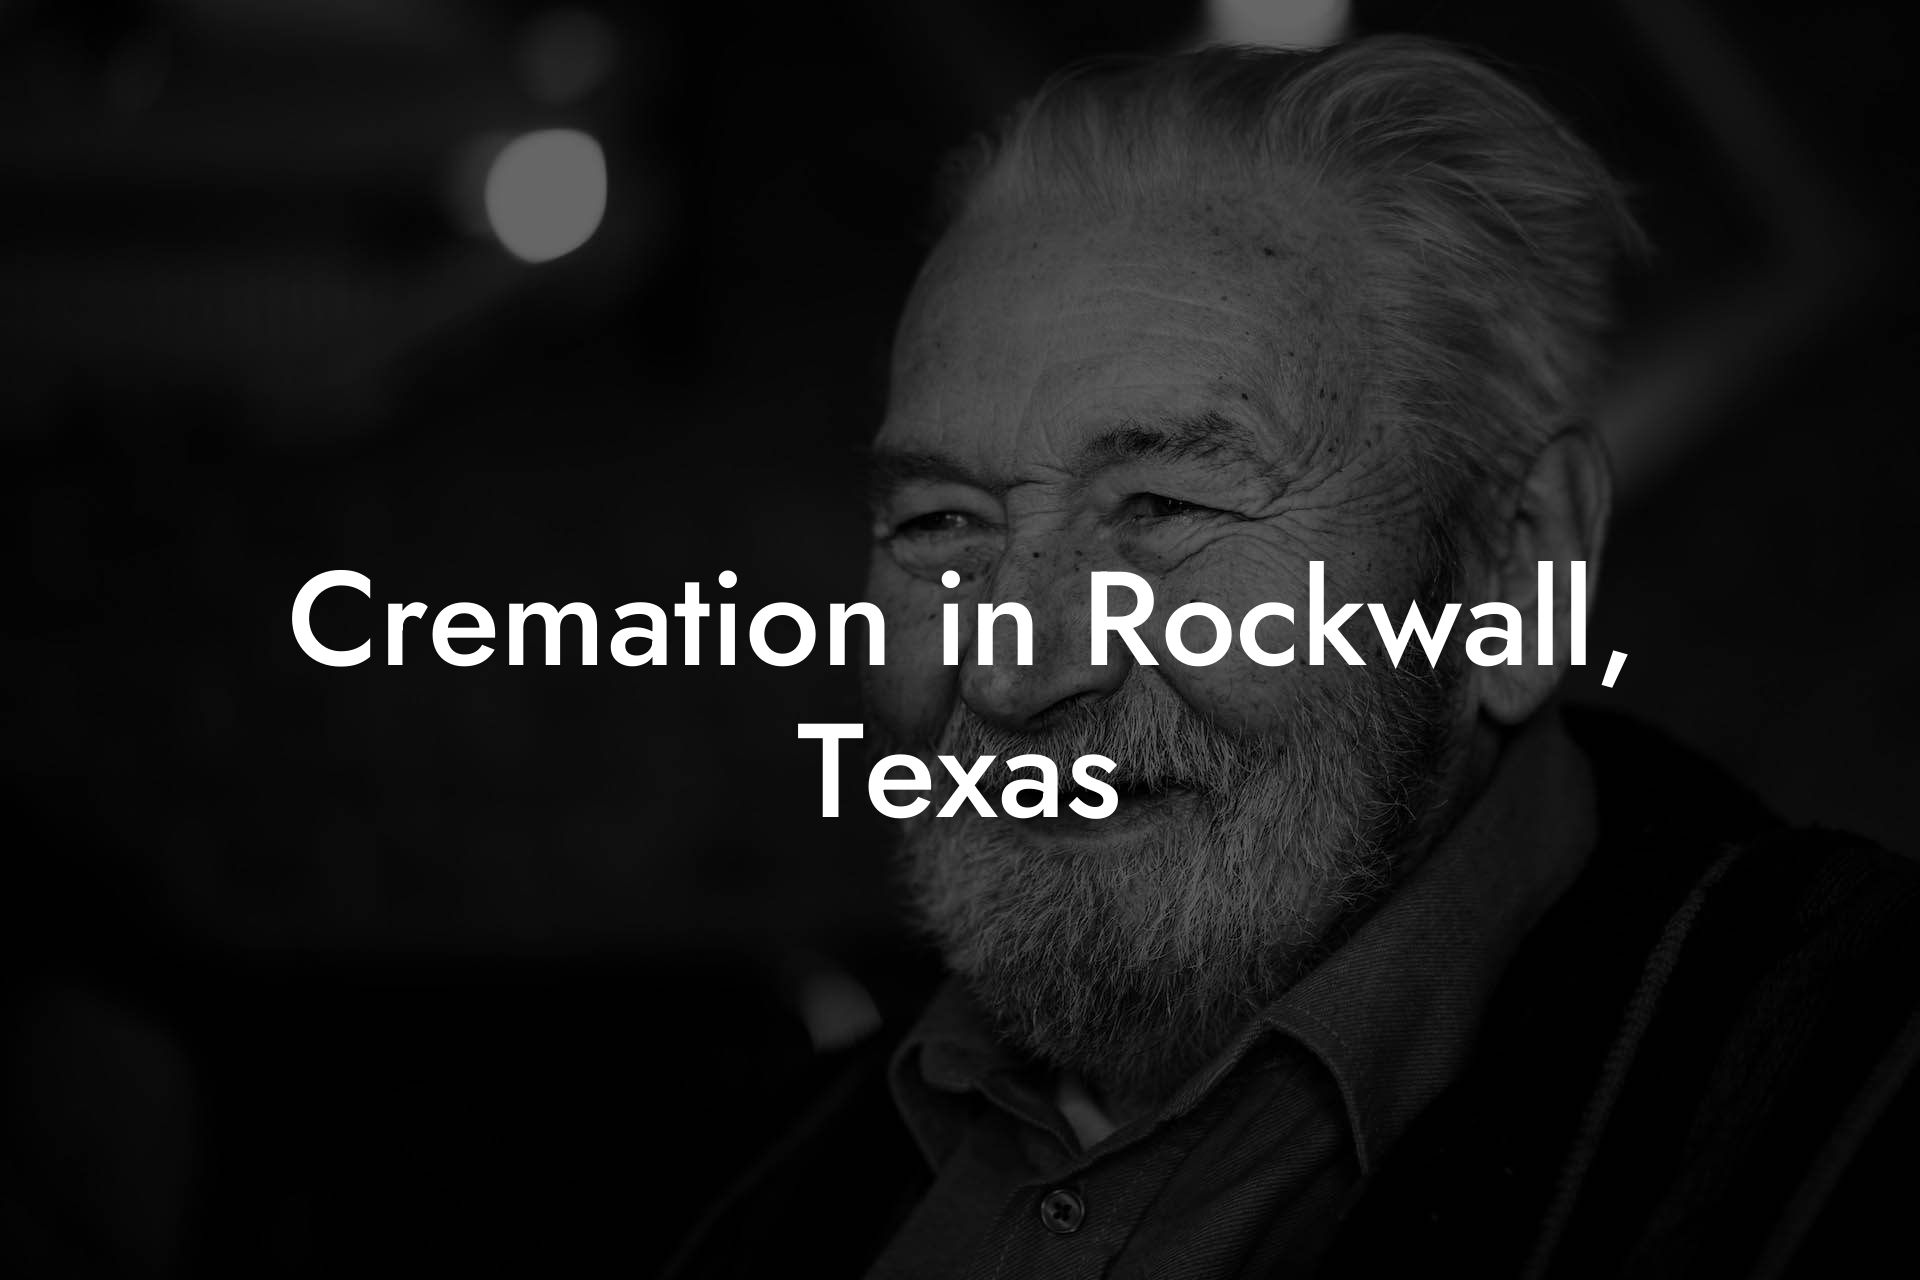 Cremation in Rockwall, Texas